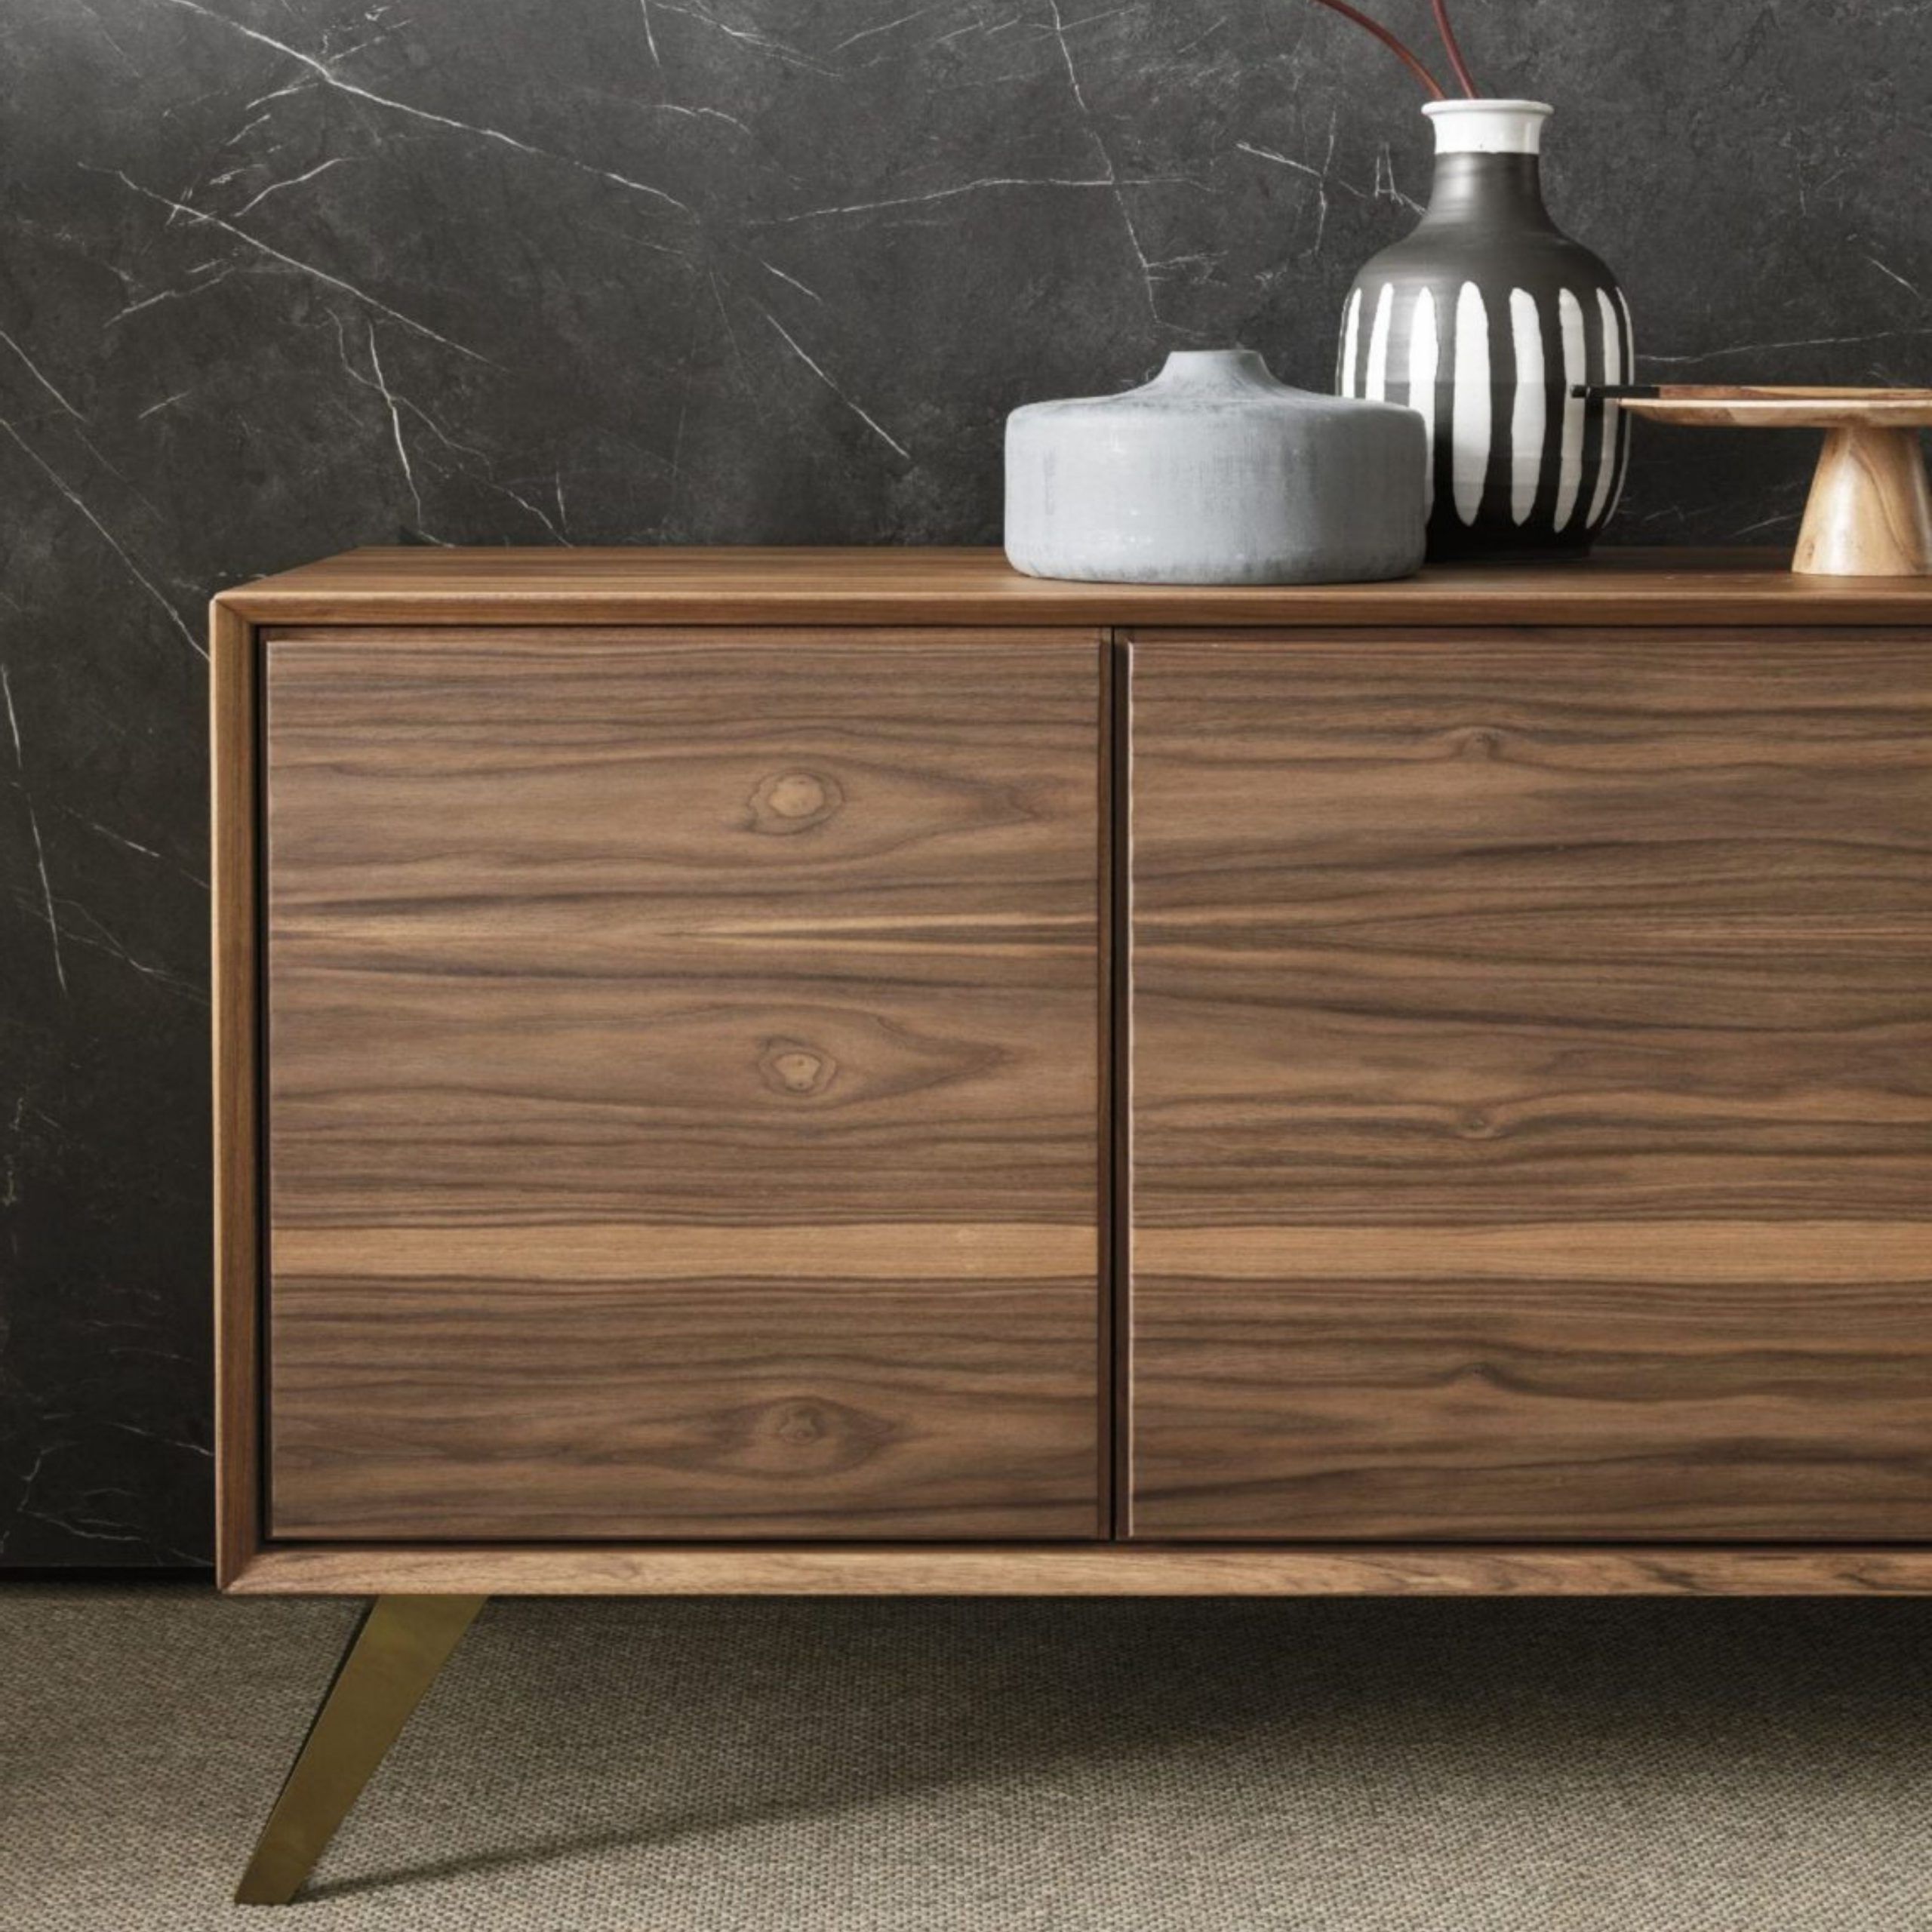 Latest High Court Sideboard Model Nook Pertaining To Transitional Oak Sideboards (View 6 of 10)